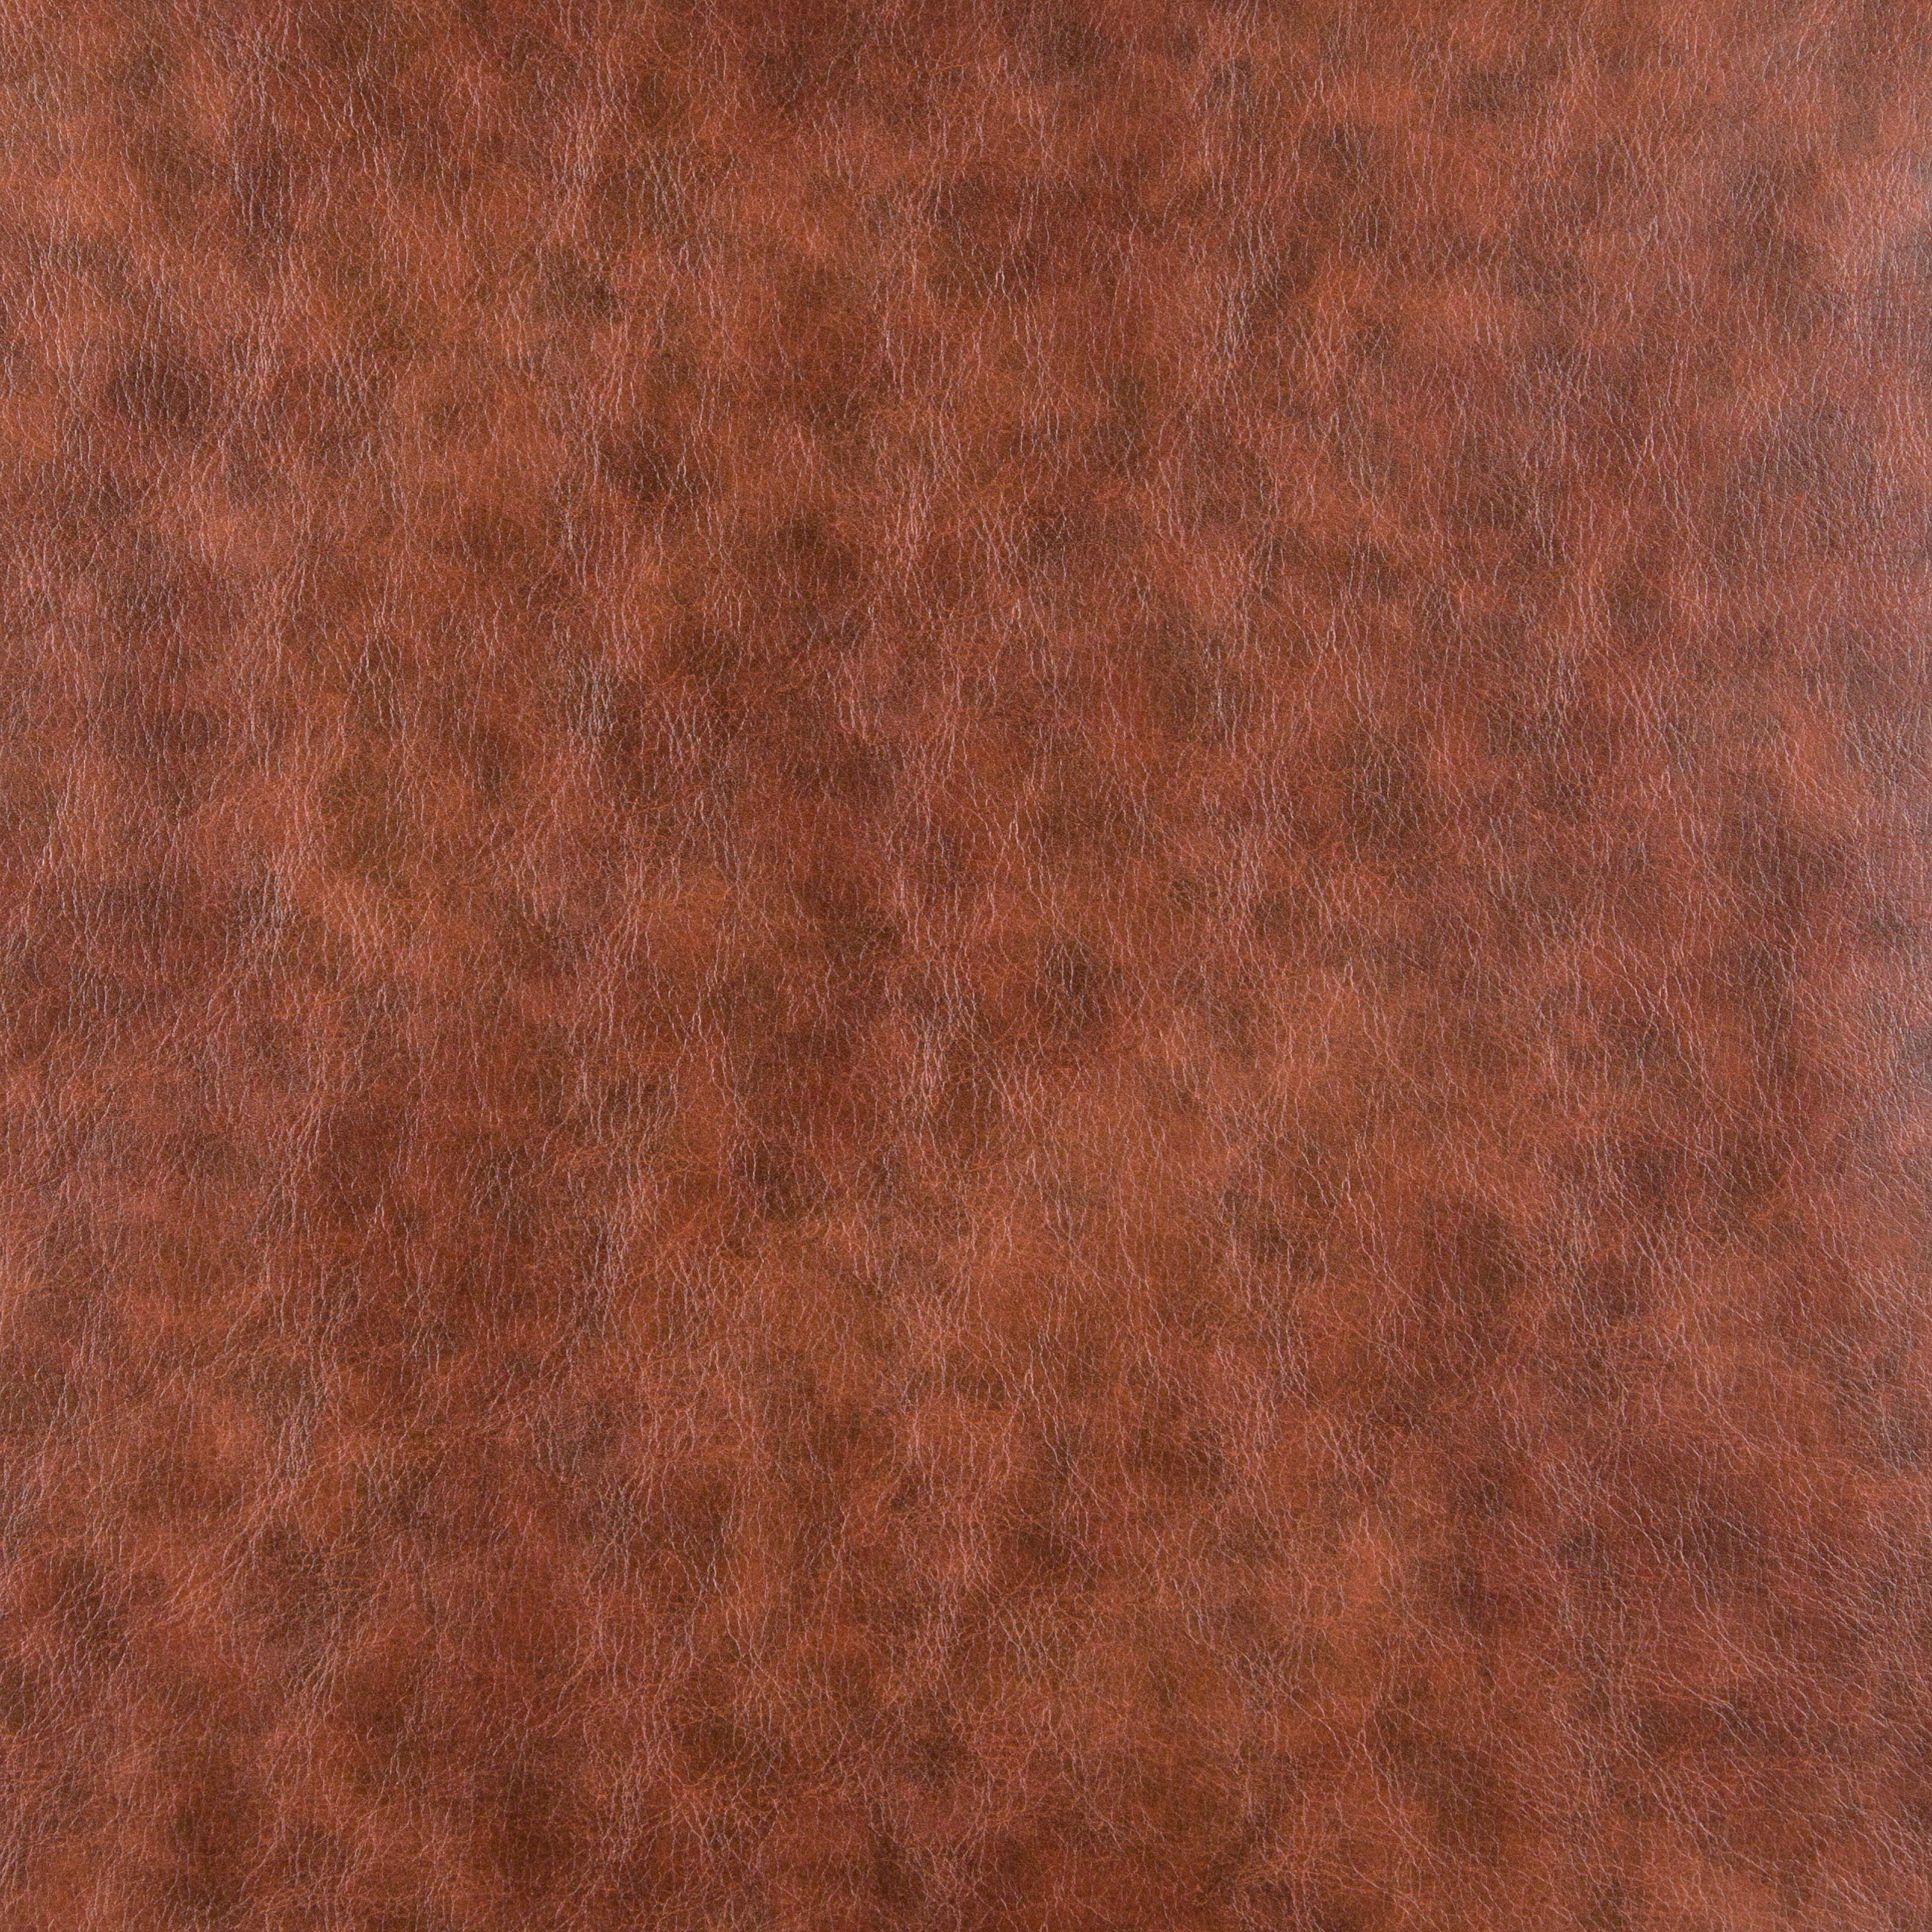 Saddle Brown Distressed Leather Hide, Distressed Leather Fabric Upholstery